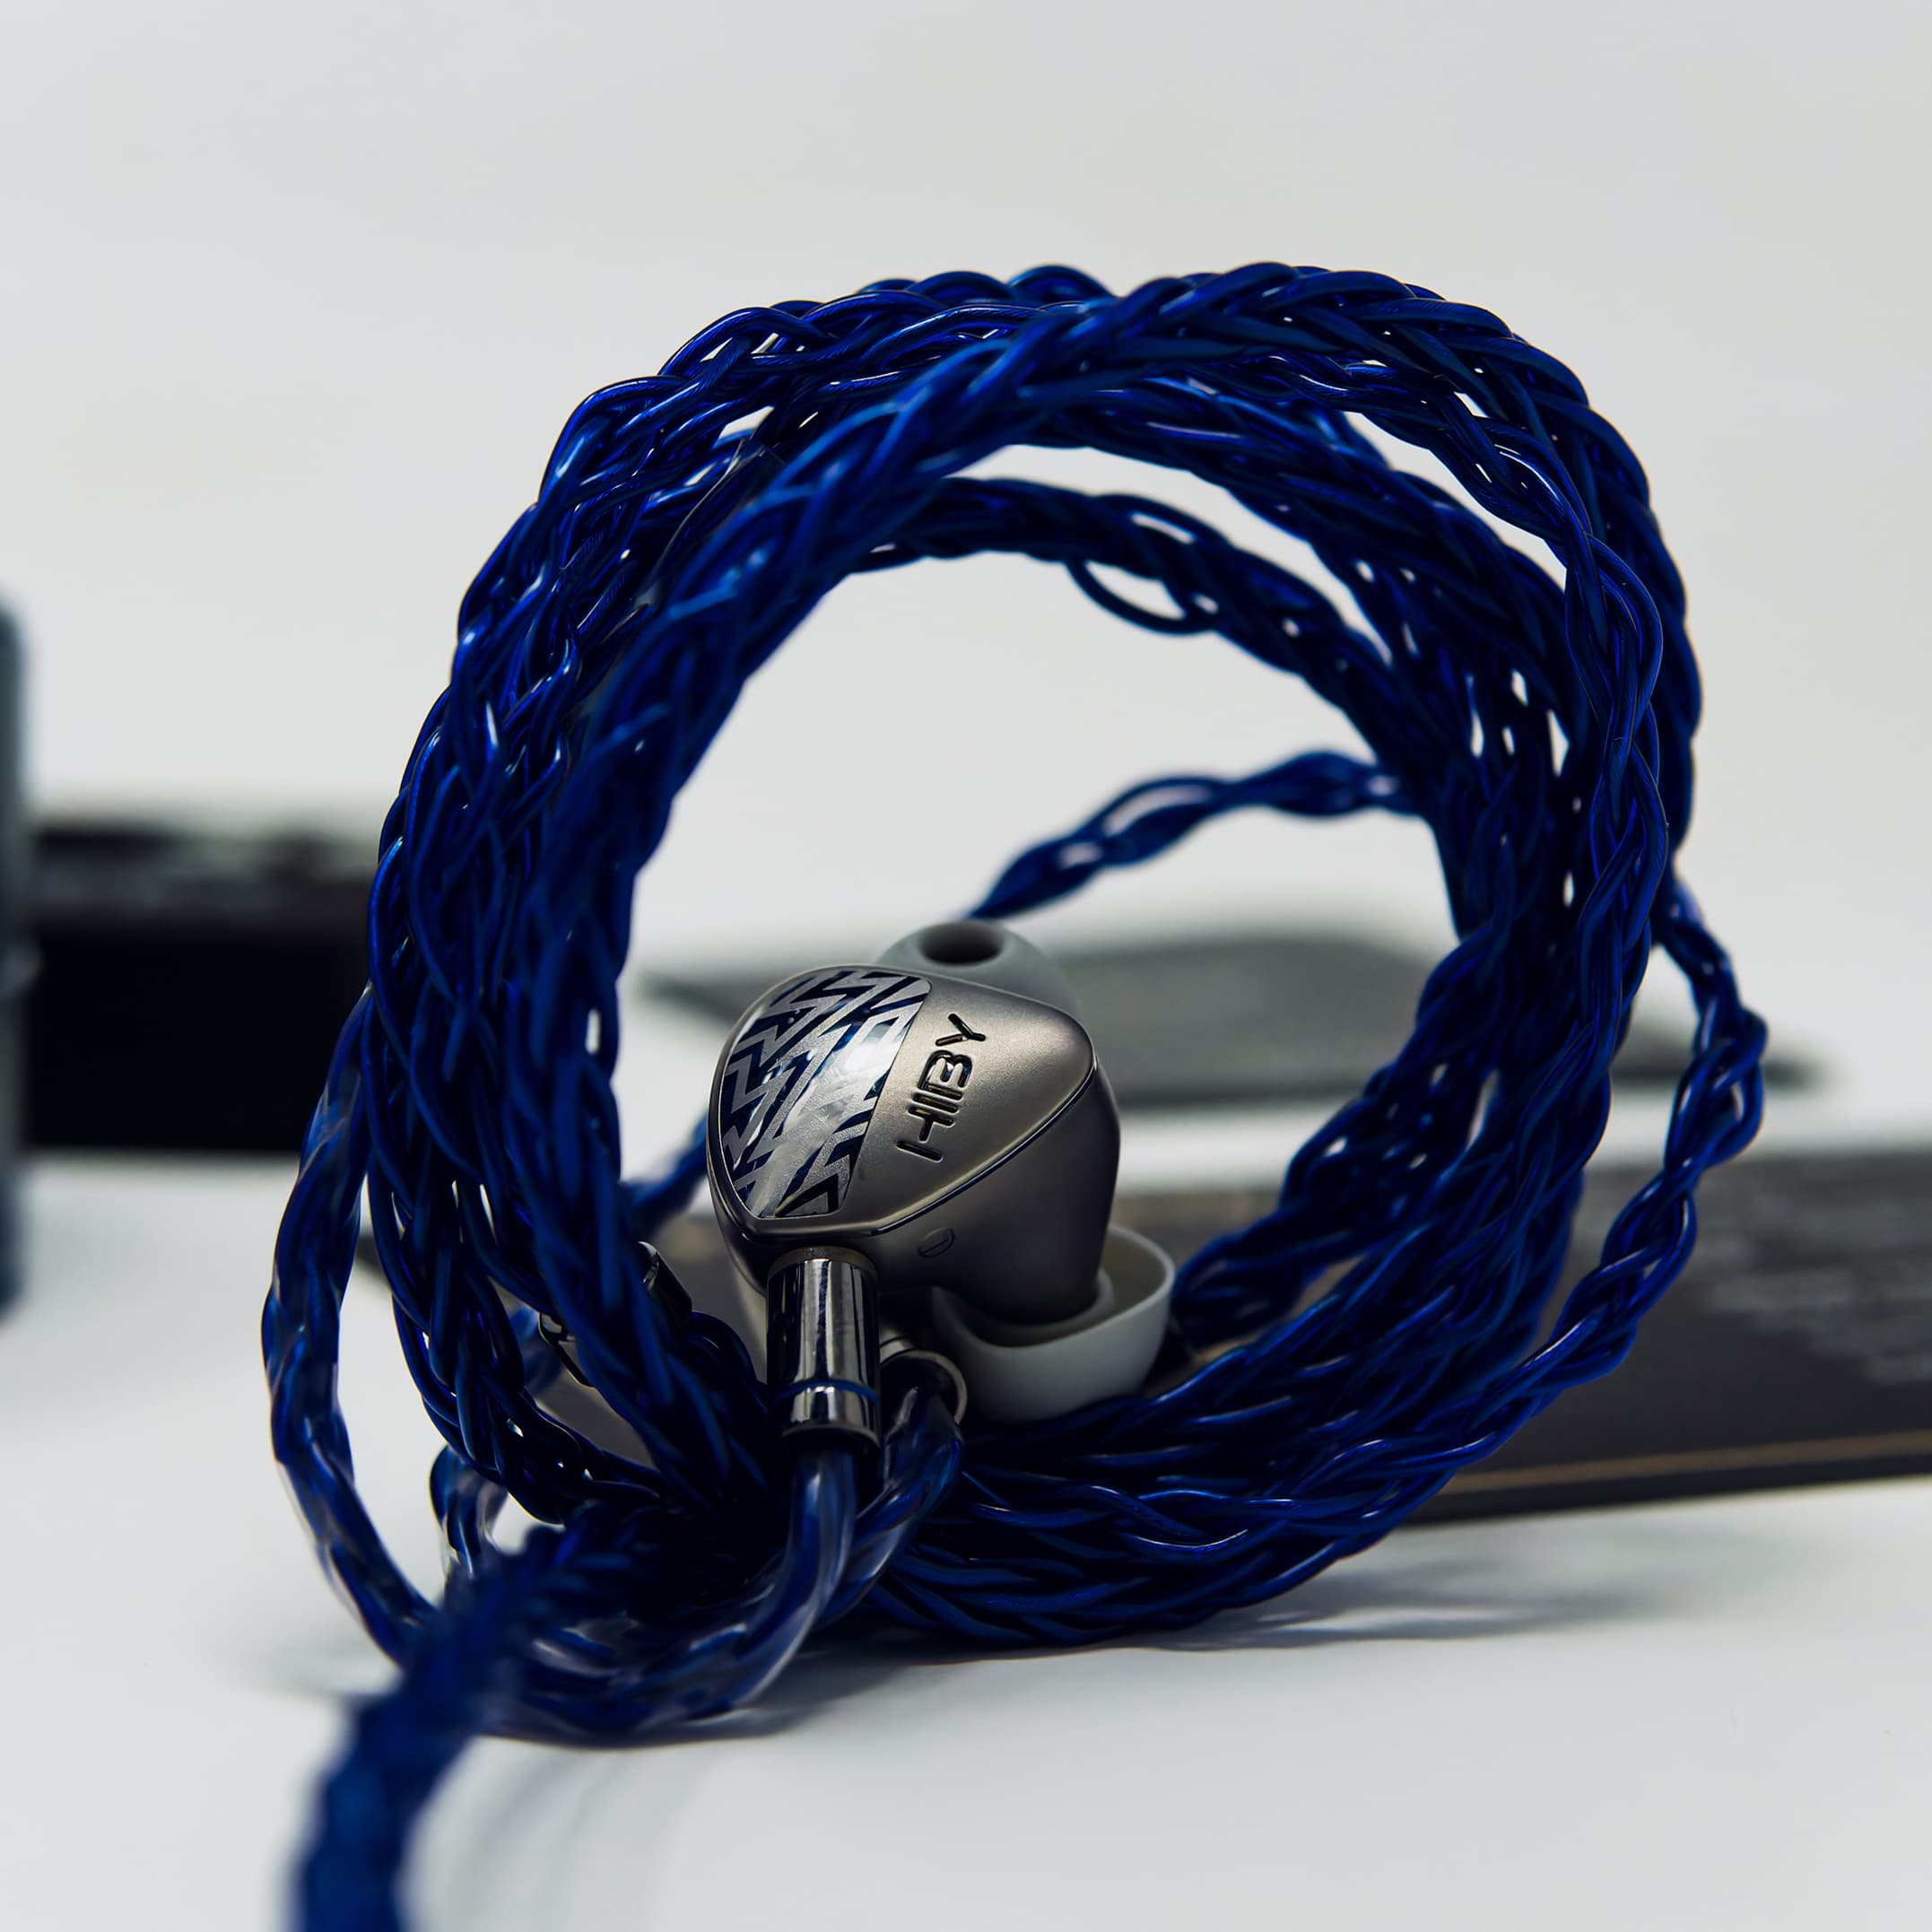 Truthear x Crinacle ZERO In-Ear Monitors Review - Two Dynamic Drivers, One  Harman Tuning! - Packaging & Accessories